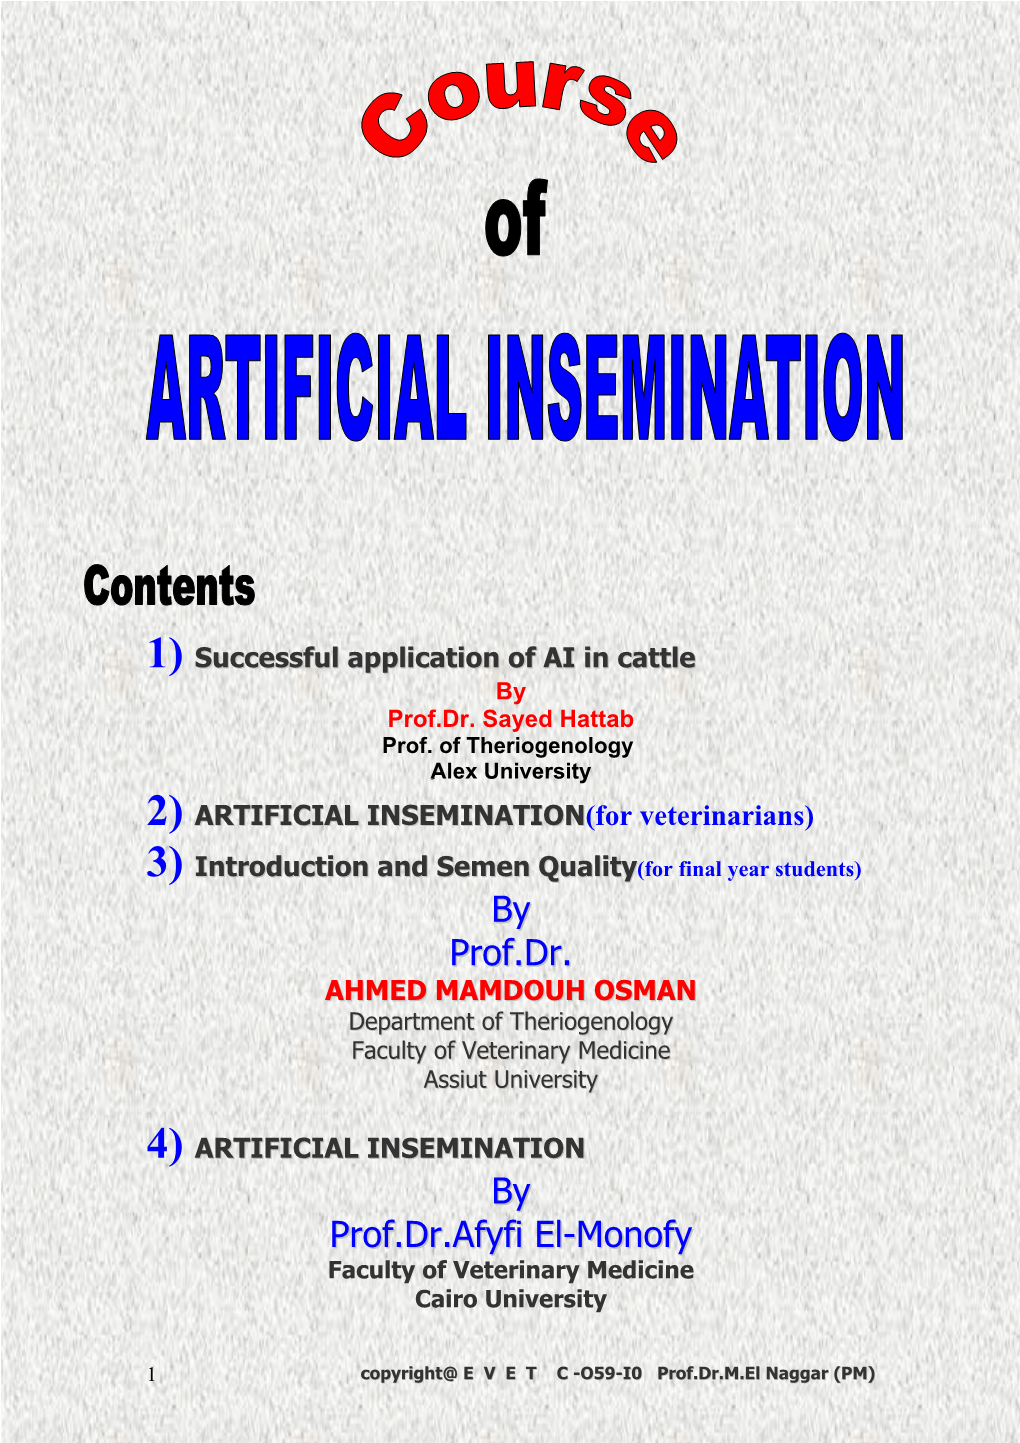 ARTIFICIAL INSEMINATION(For Veterinarians) 3) Introduction and Semen Quality(For Final Year Students) by Prof.Dr